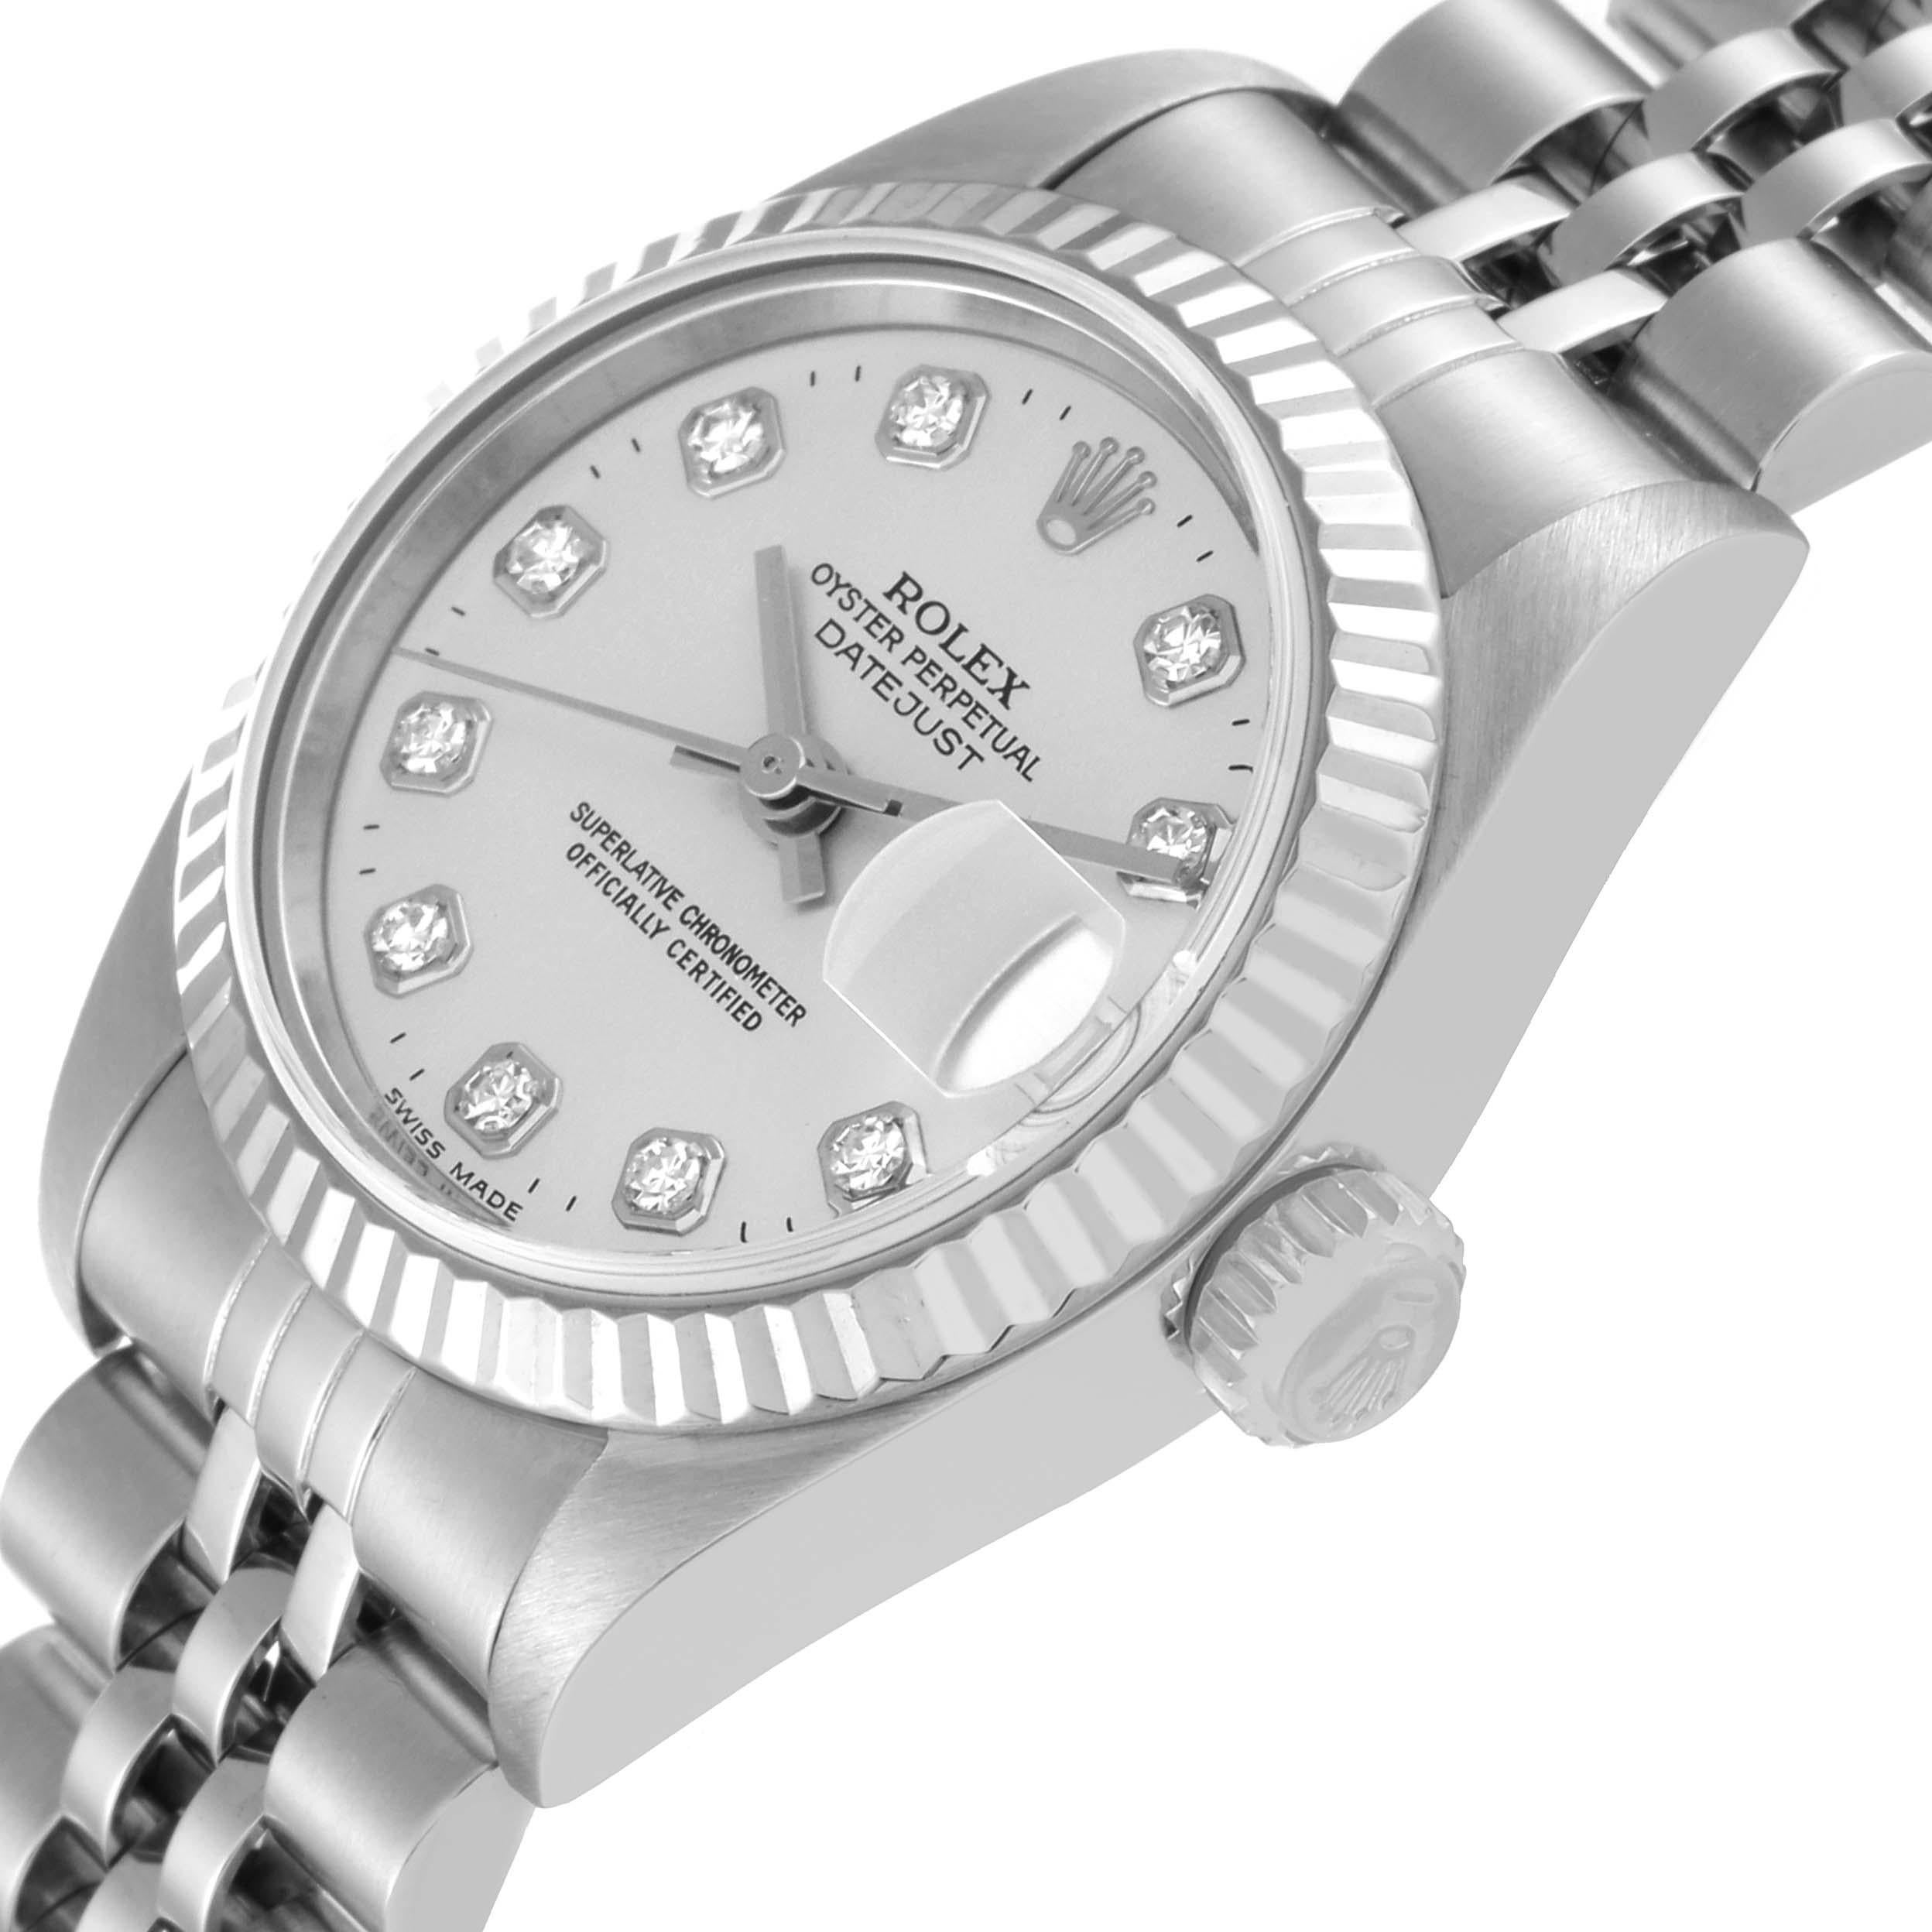 Rolex Datejust Steel White Gold Diamond Dial Ladies Watch 79174 Box Papers 1